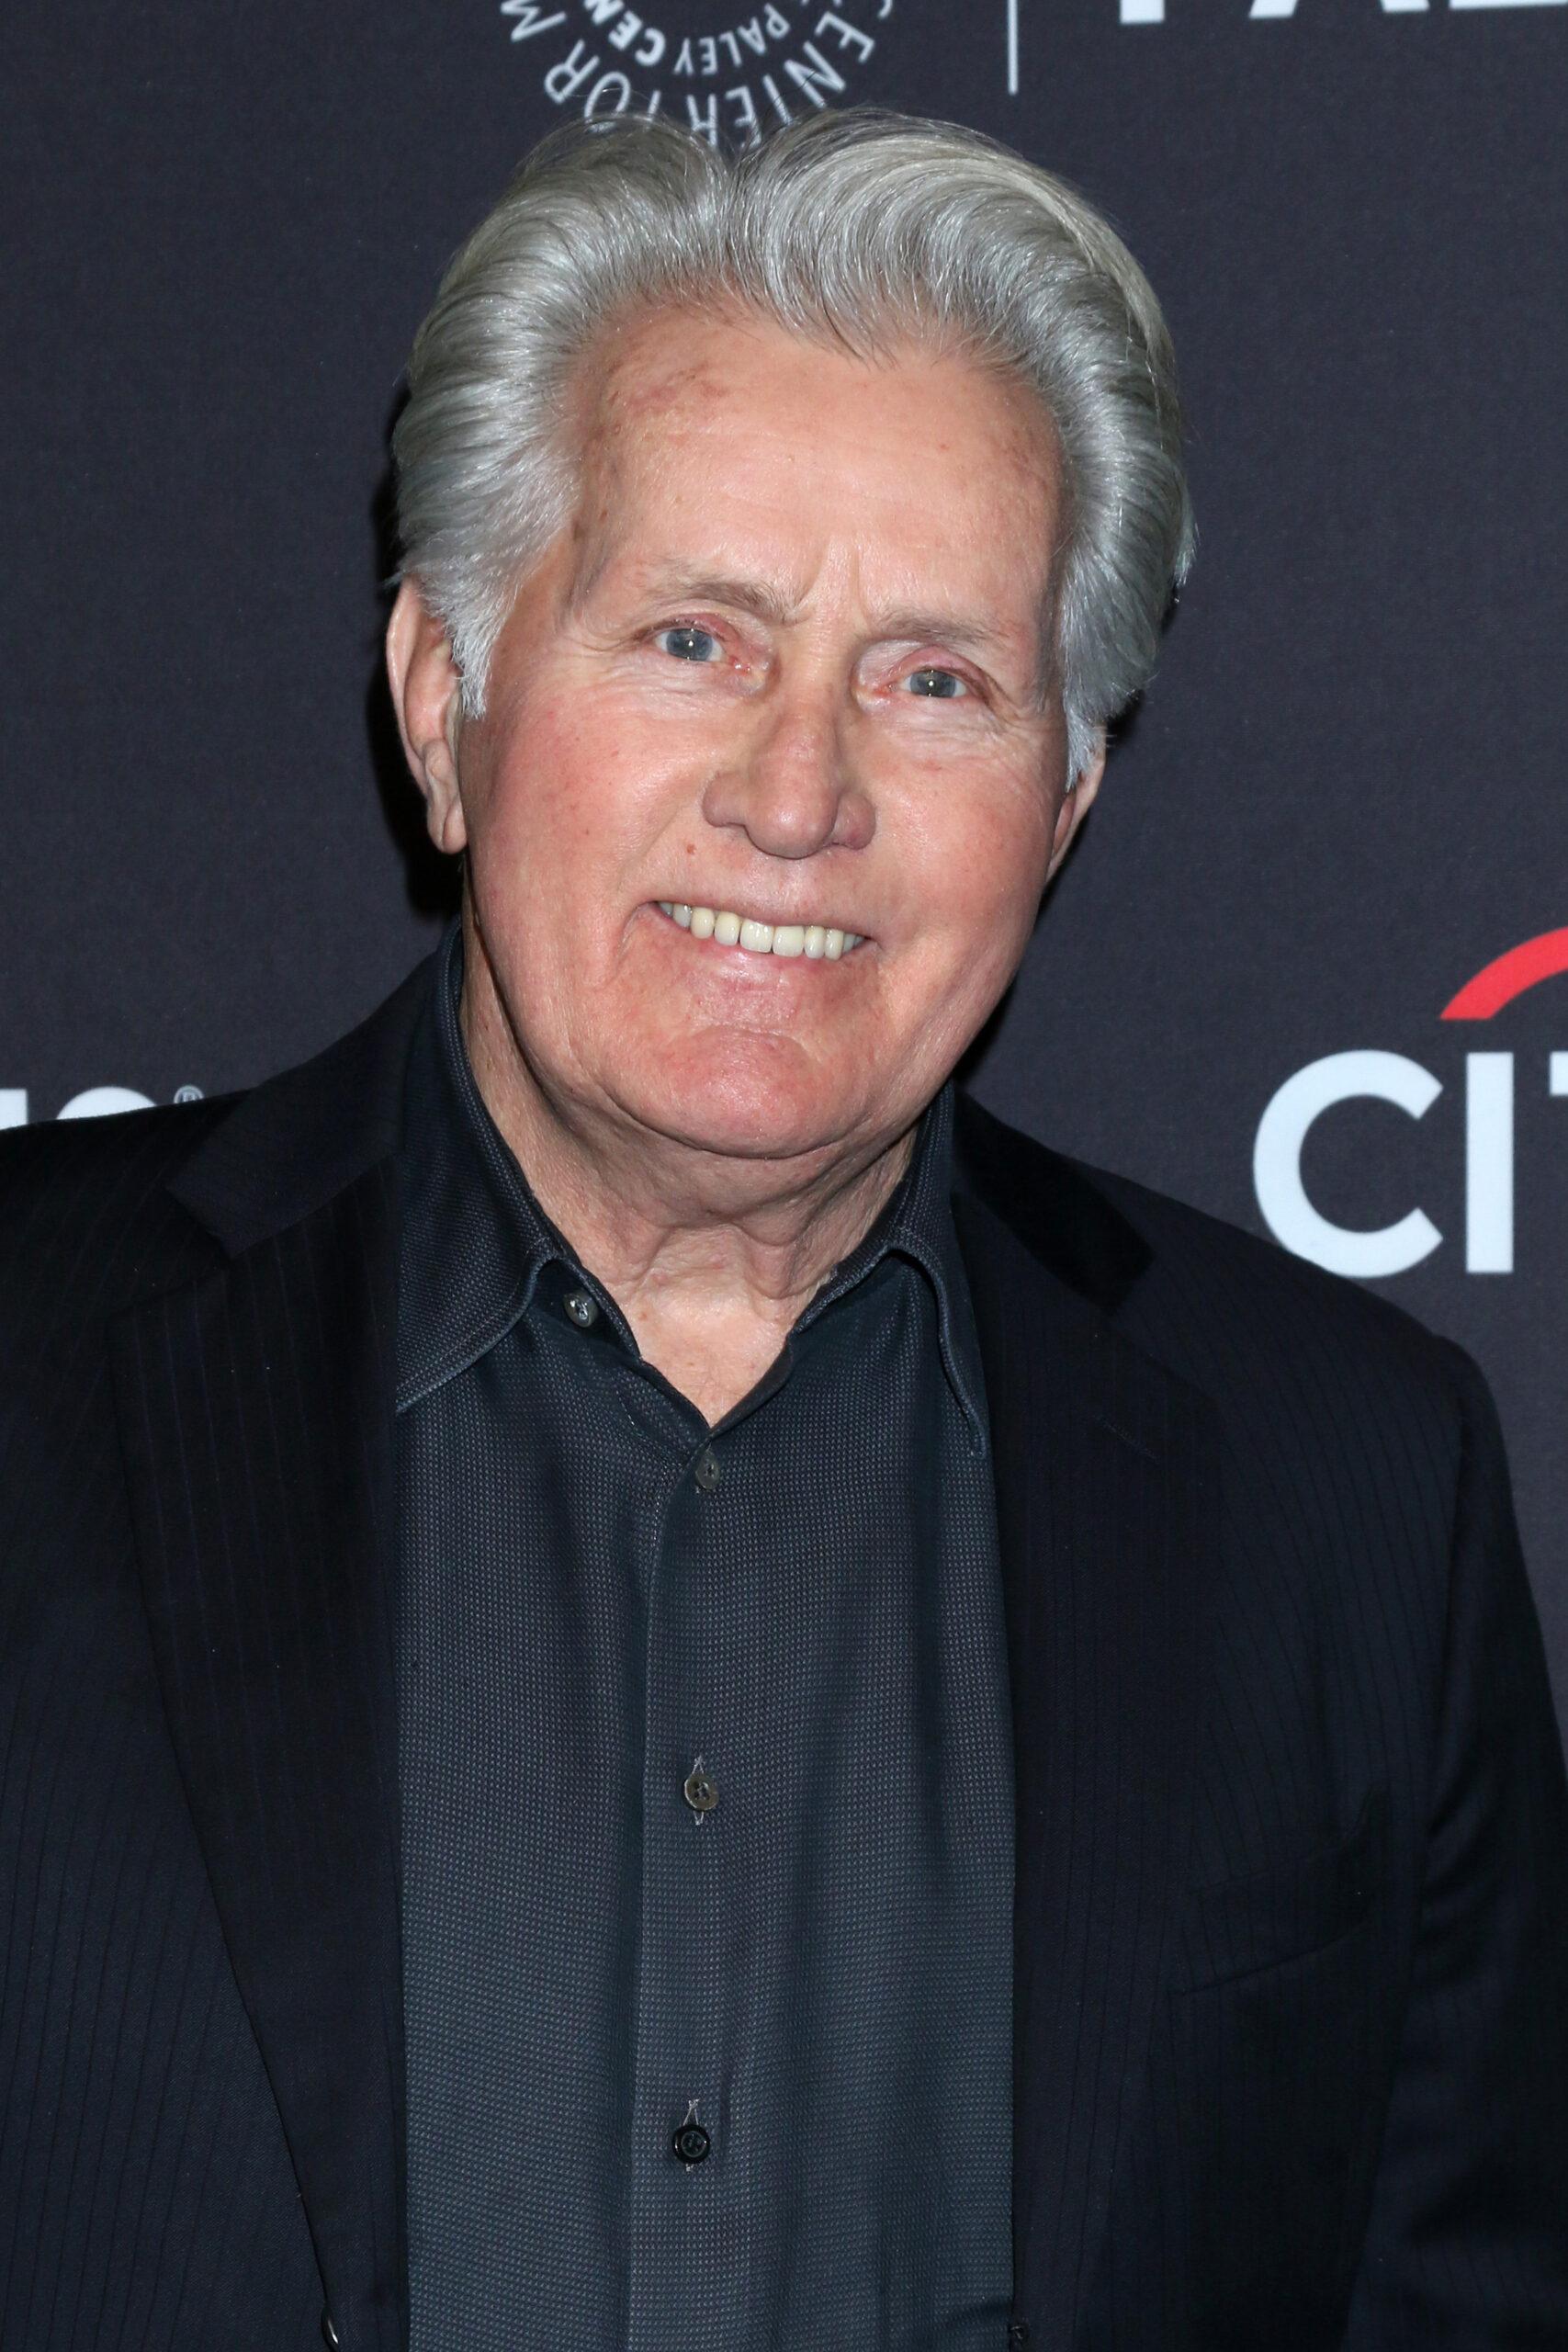 LOS ANGELES - MAR 16: Martin Sheen at the PaleyFest - "Grace and Frankie" Event at the Dolby Theater on March 16, 2019 in Los Angeles, CA 